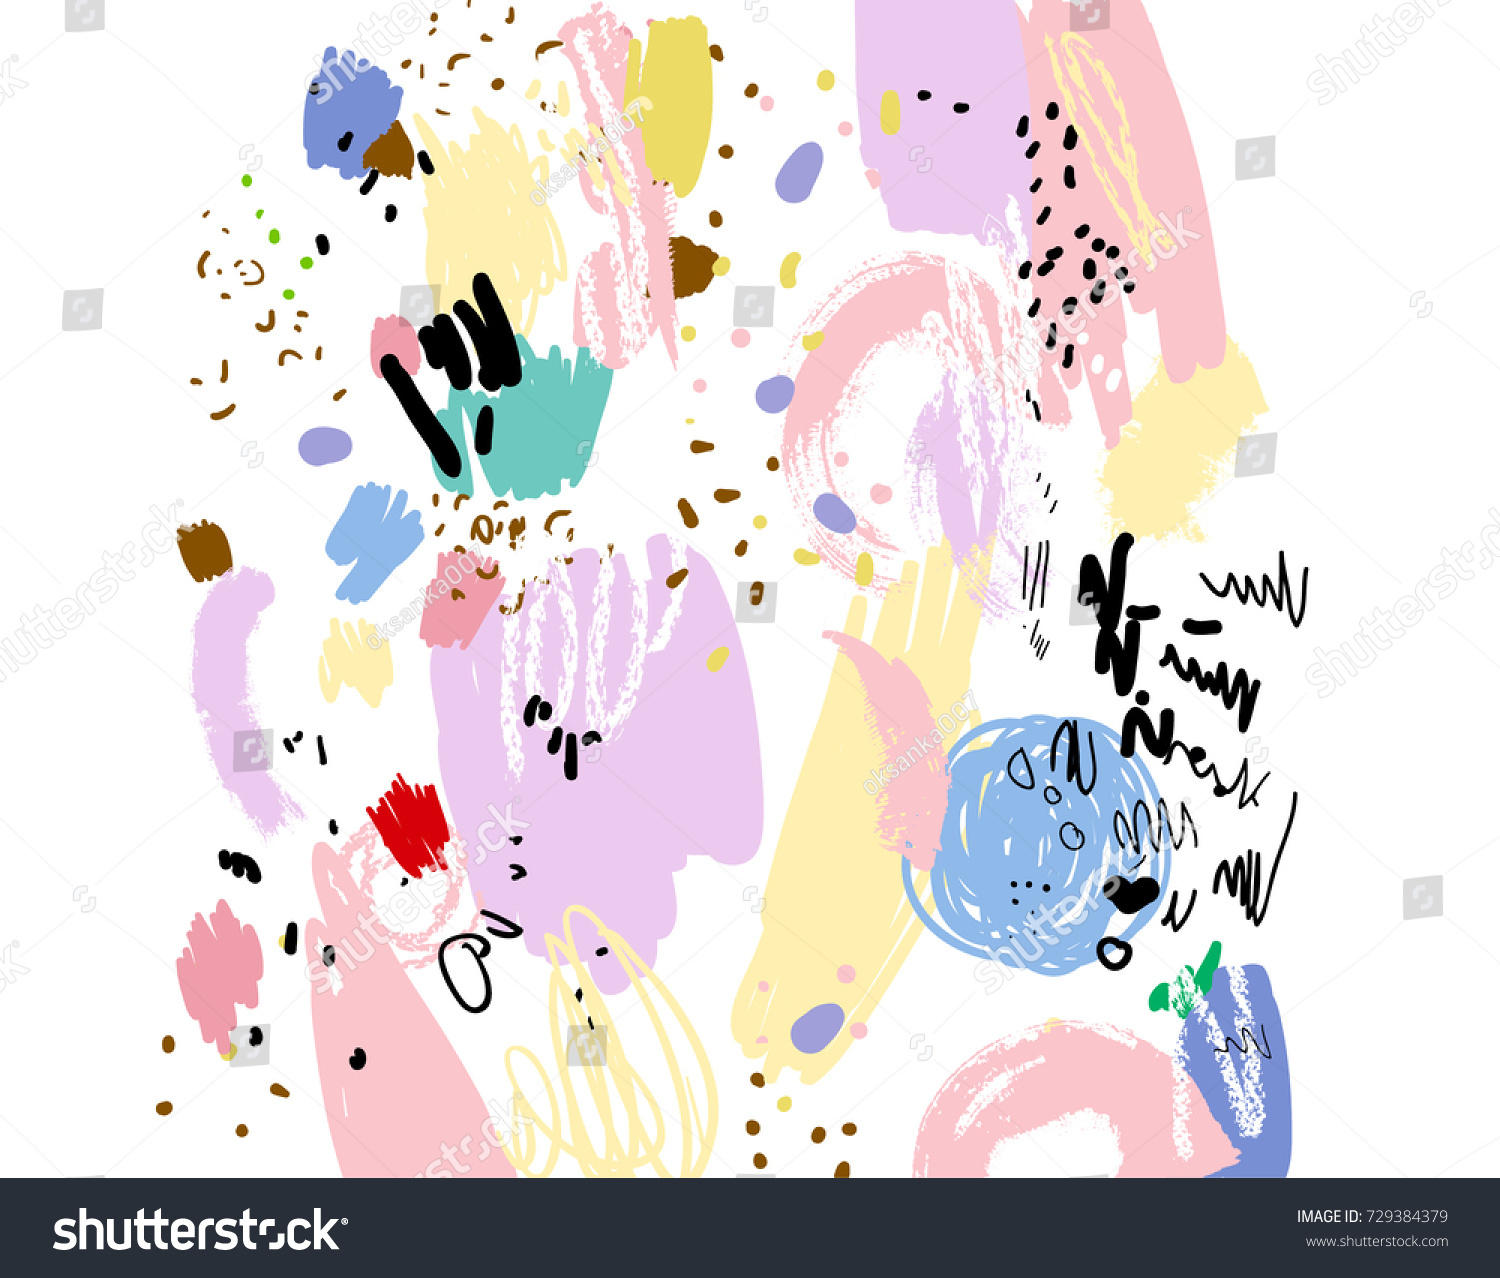 Brush Marker Pencil Stroke Pattern Abstract Stock Vector Royalty Free 729384379